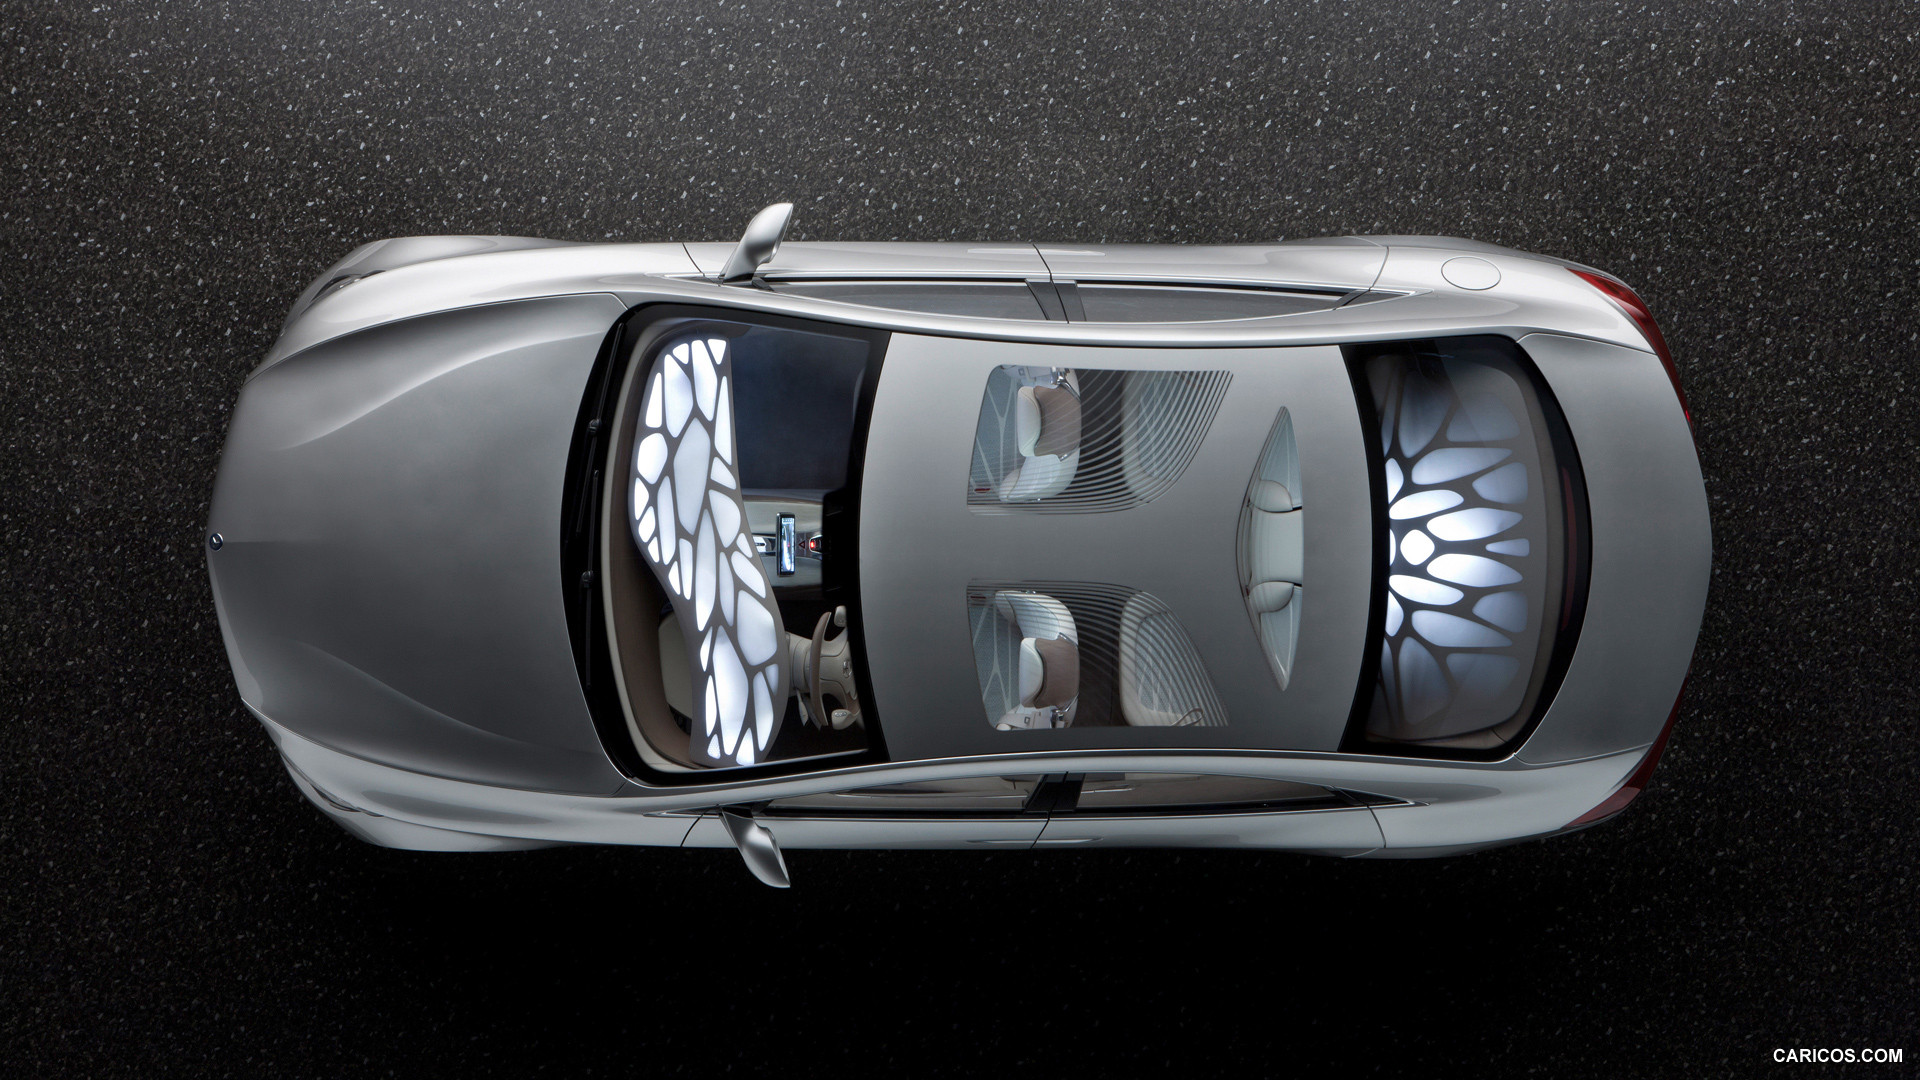 Mercedes-Benz F800 Style Concept (2010)  - Top, #72 of 120